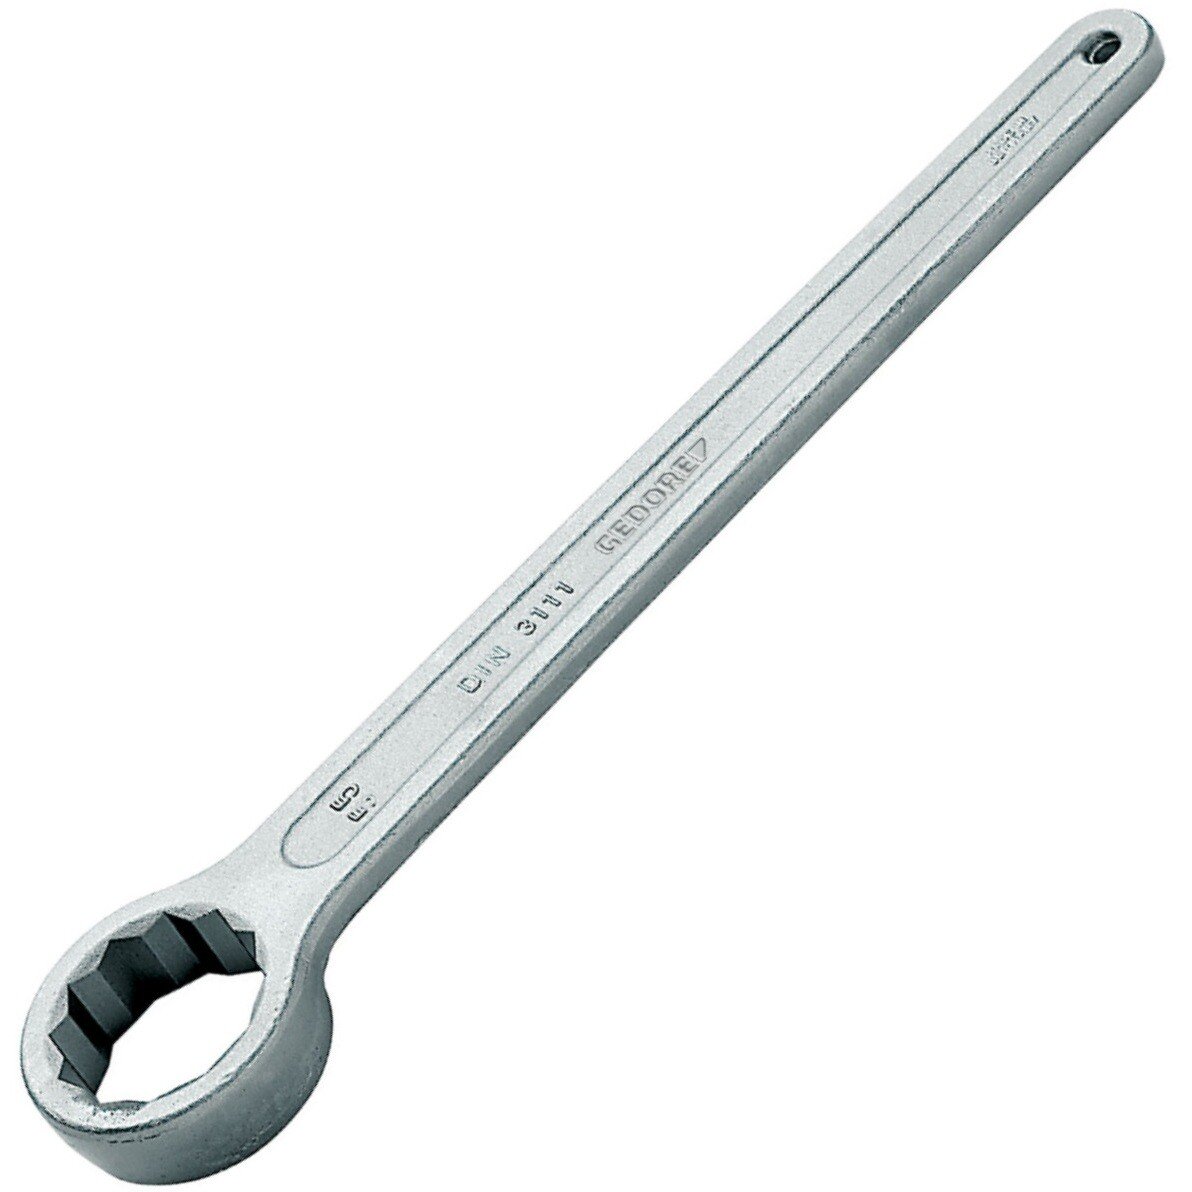 Gedore 6481830 36mm Deep Ring Spanner 308 36